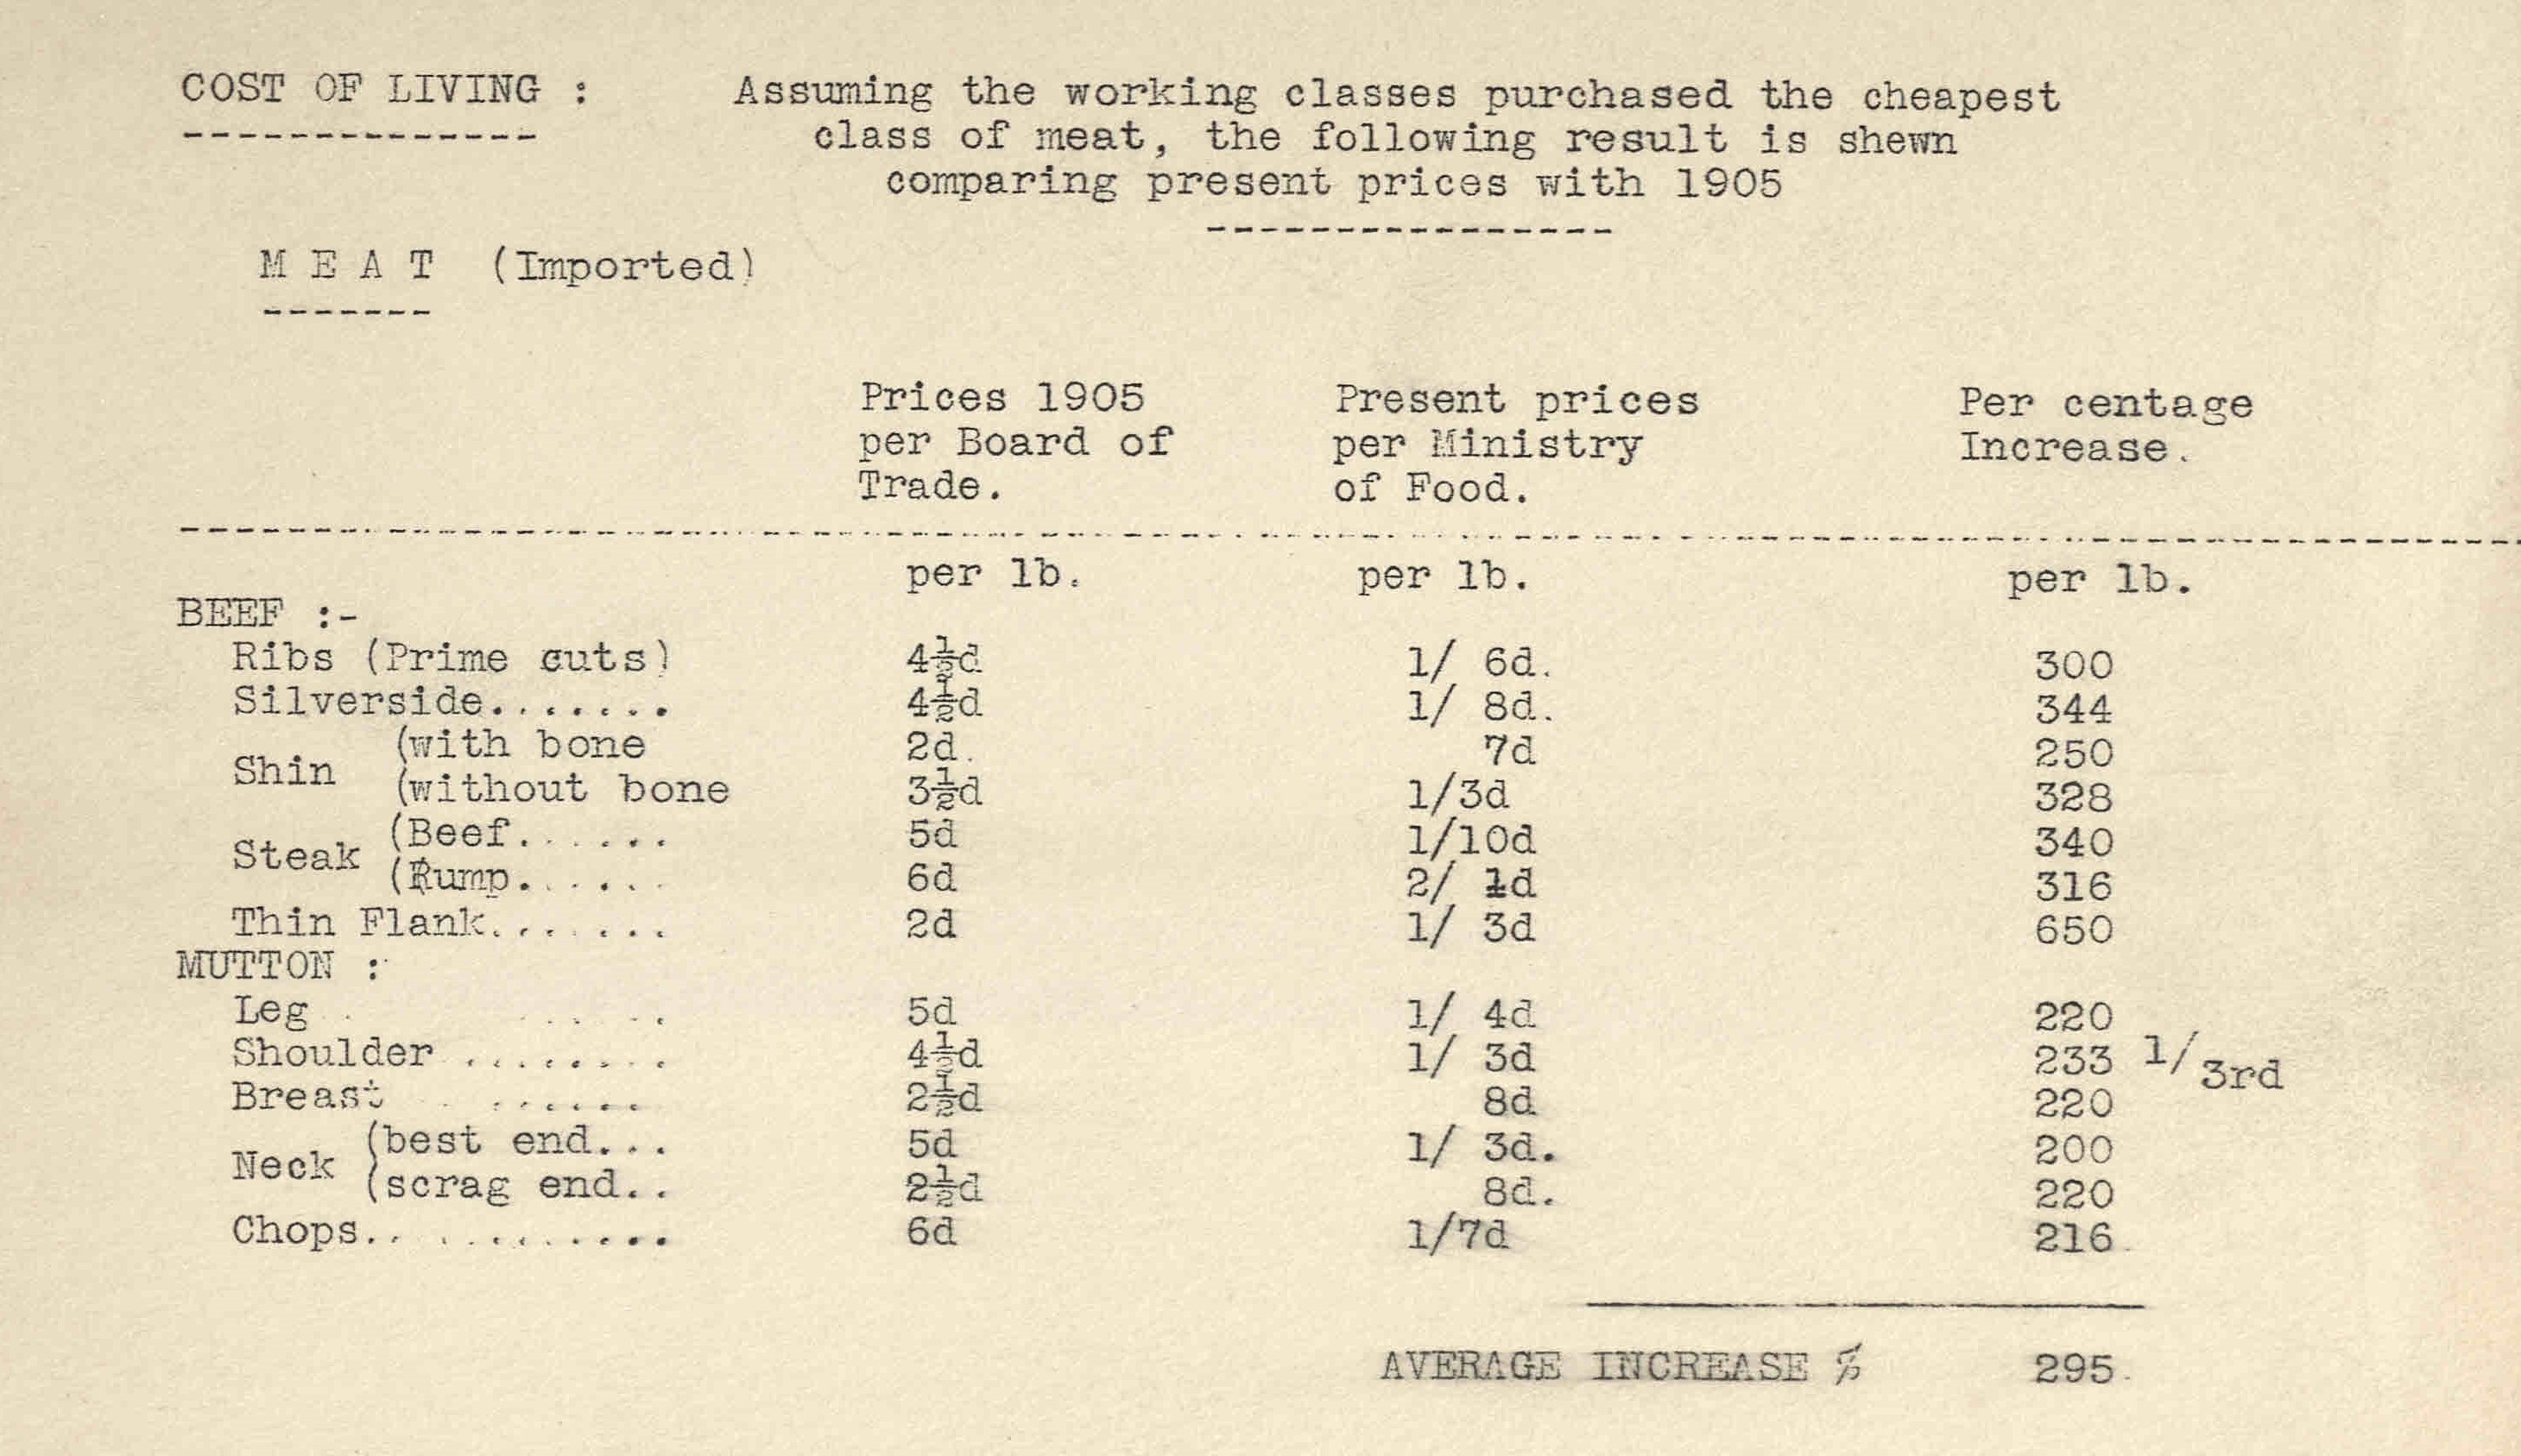 Table showing the price of imported meat in 1905 and 1920, based on government statistics